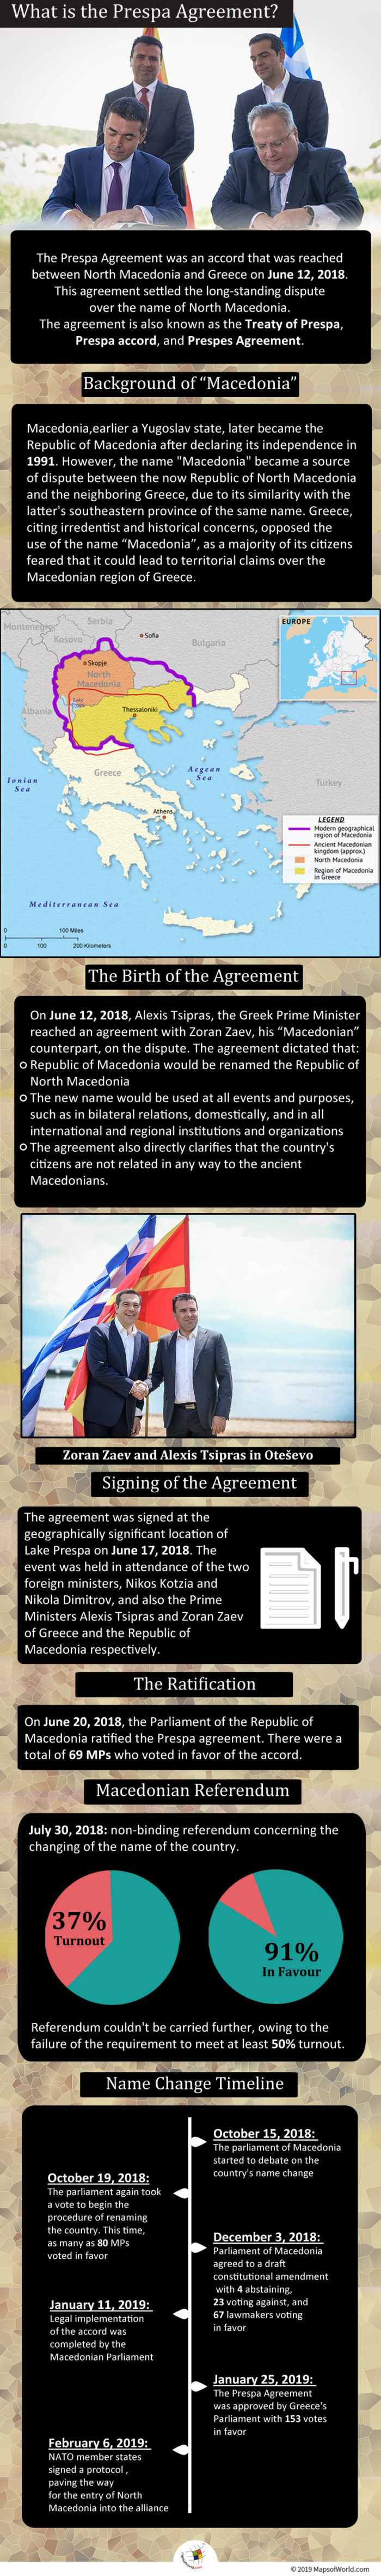 Infographic Giving Details on the Prespa Agreement